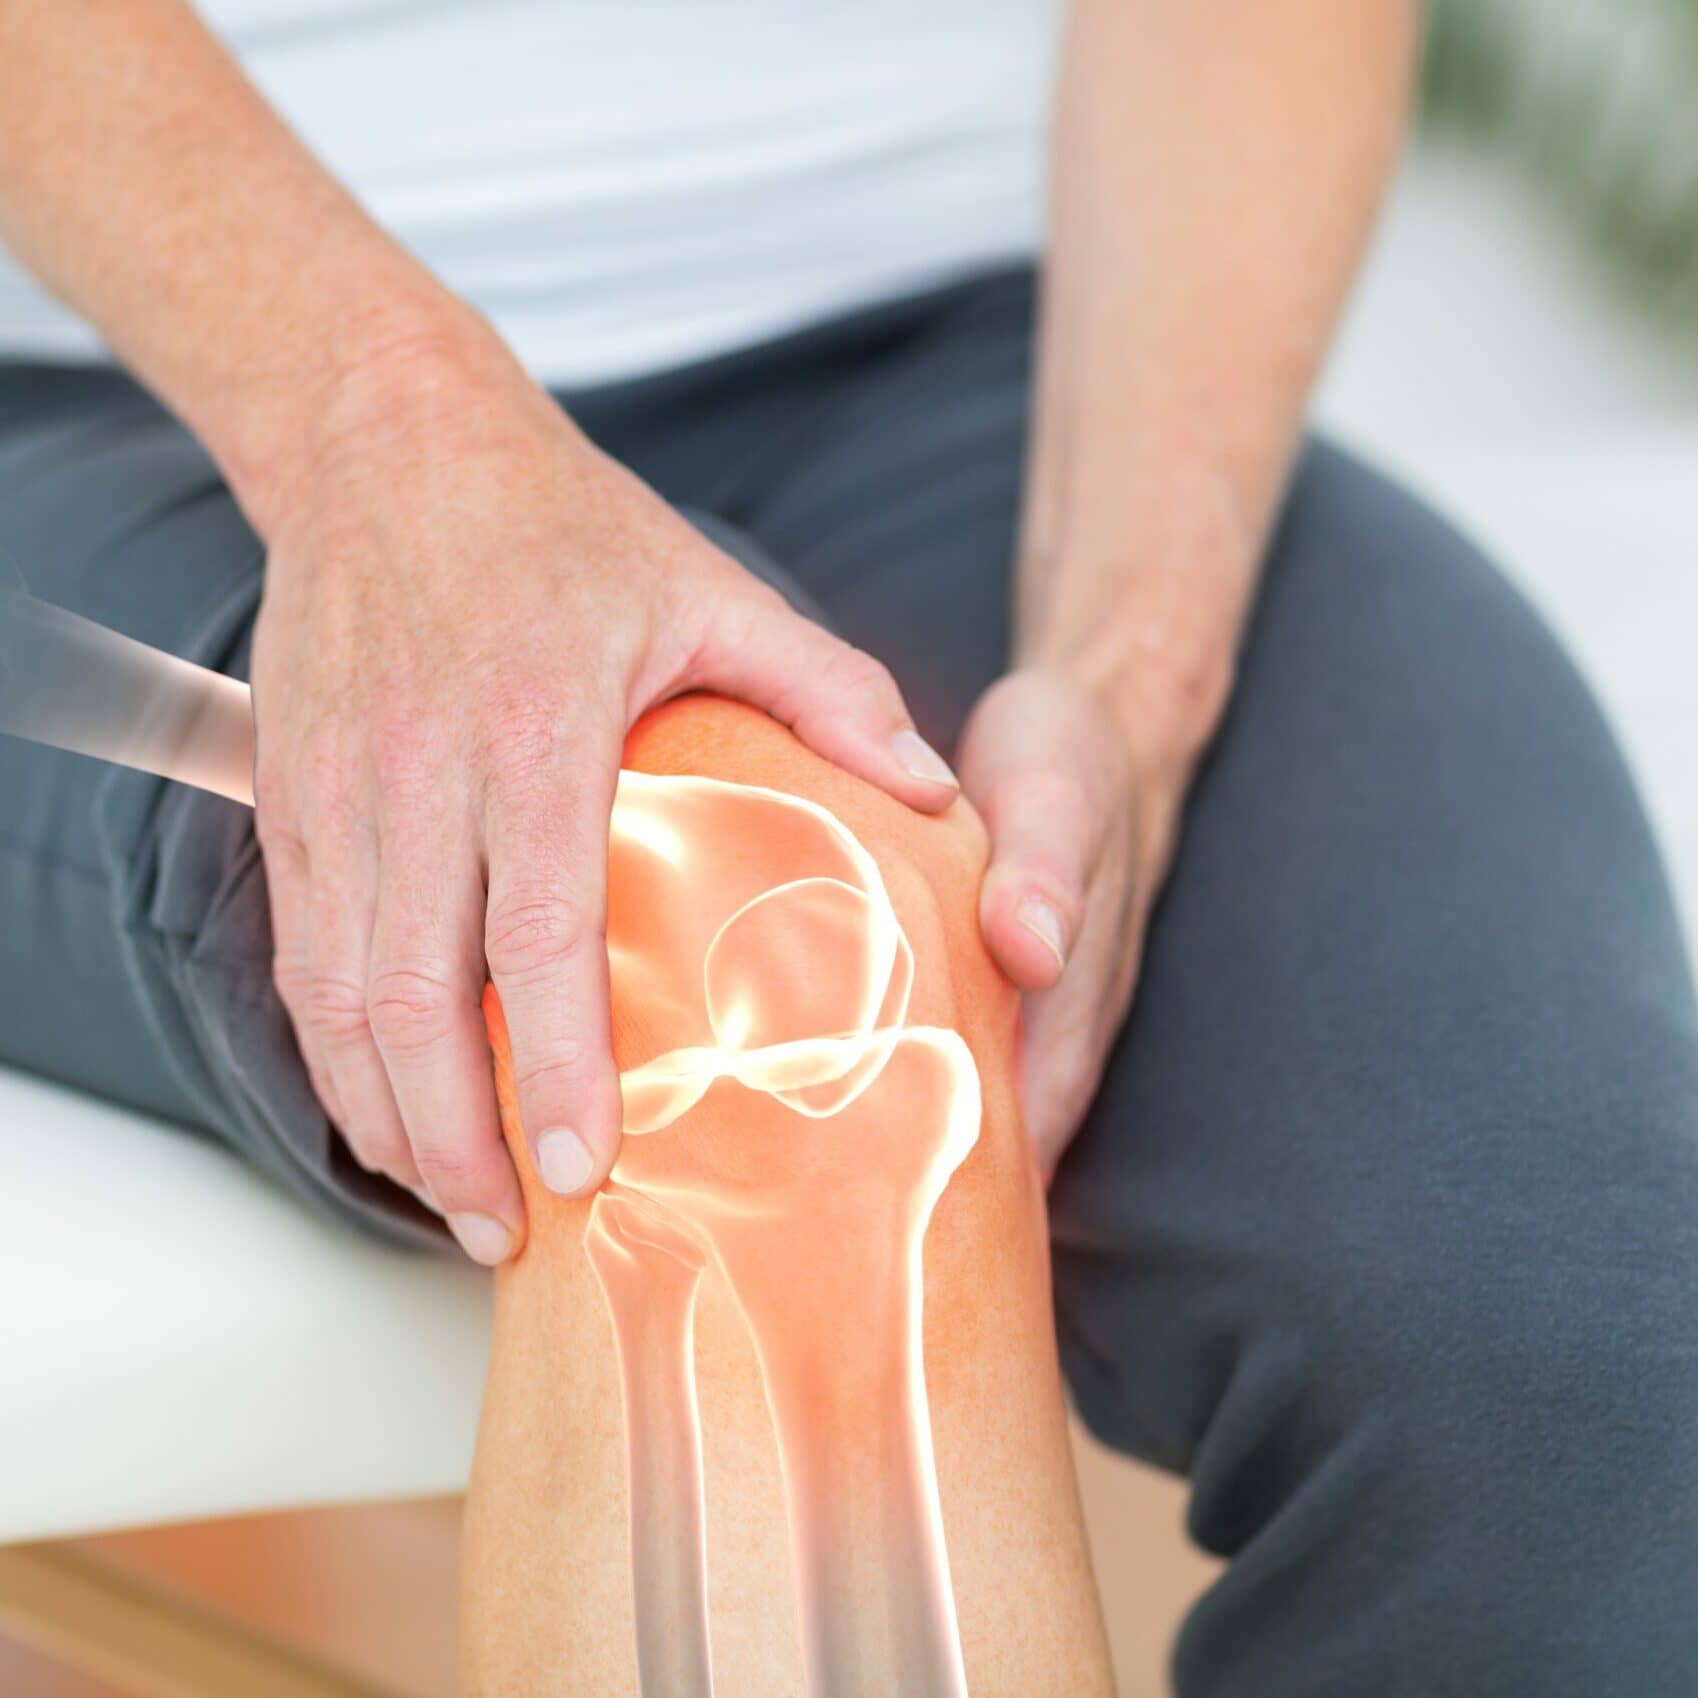 Joint injury to knee joint - Texas joint injury lawyer